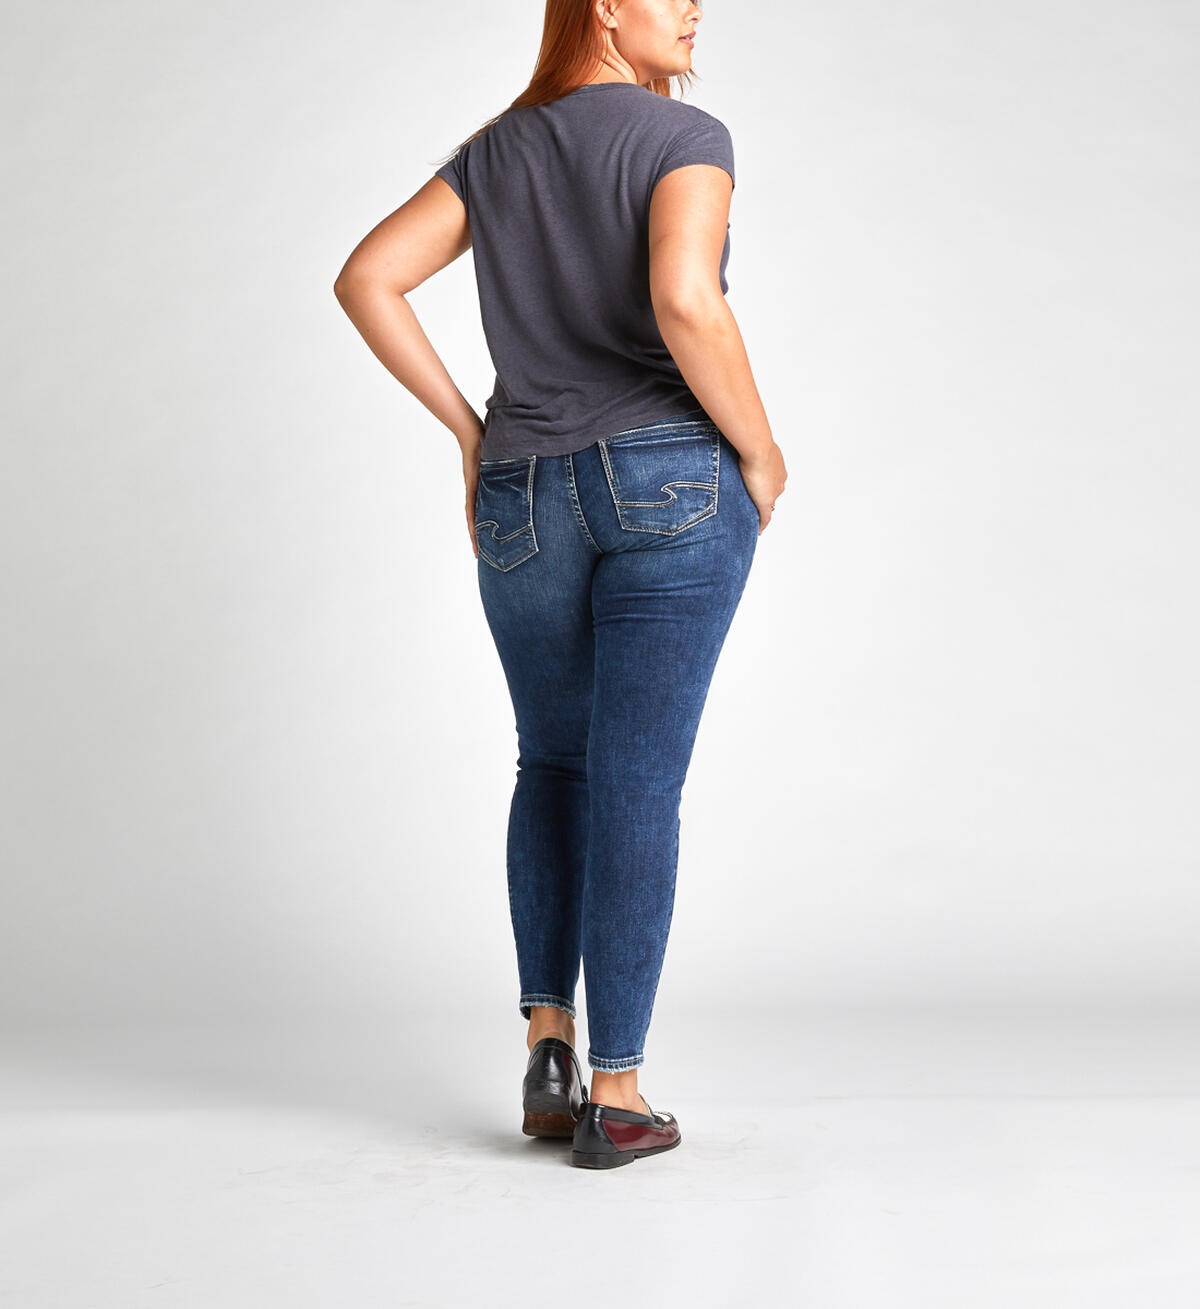 Elyse Curvy Relaxed Skinny Jeans, , hi-res image number 1